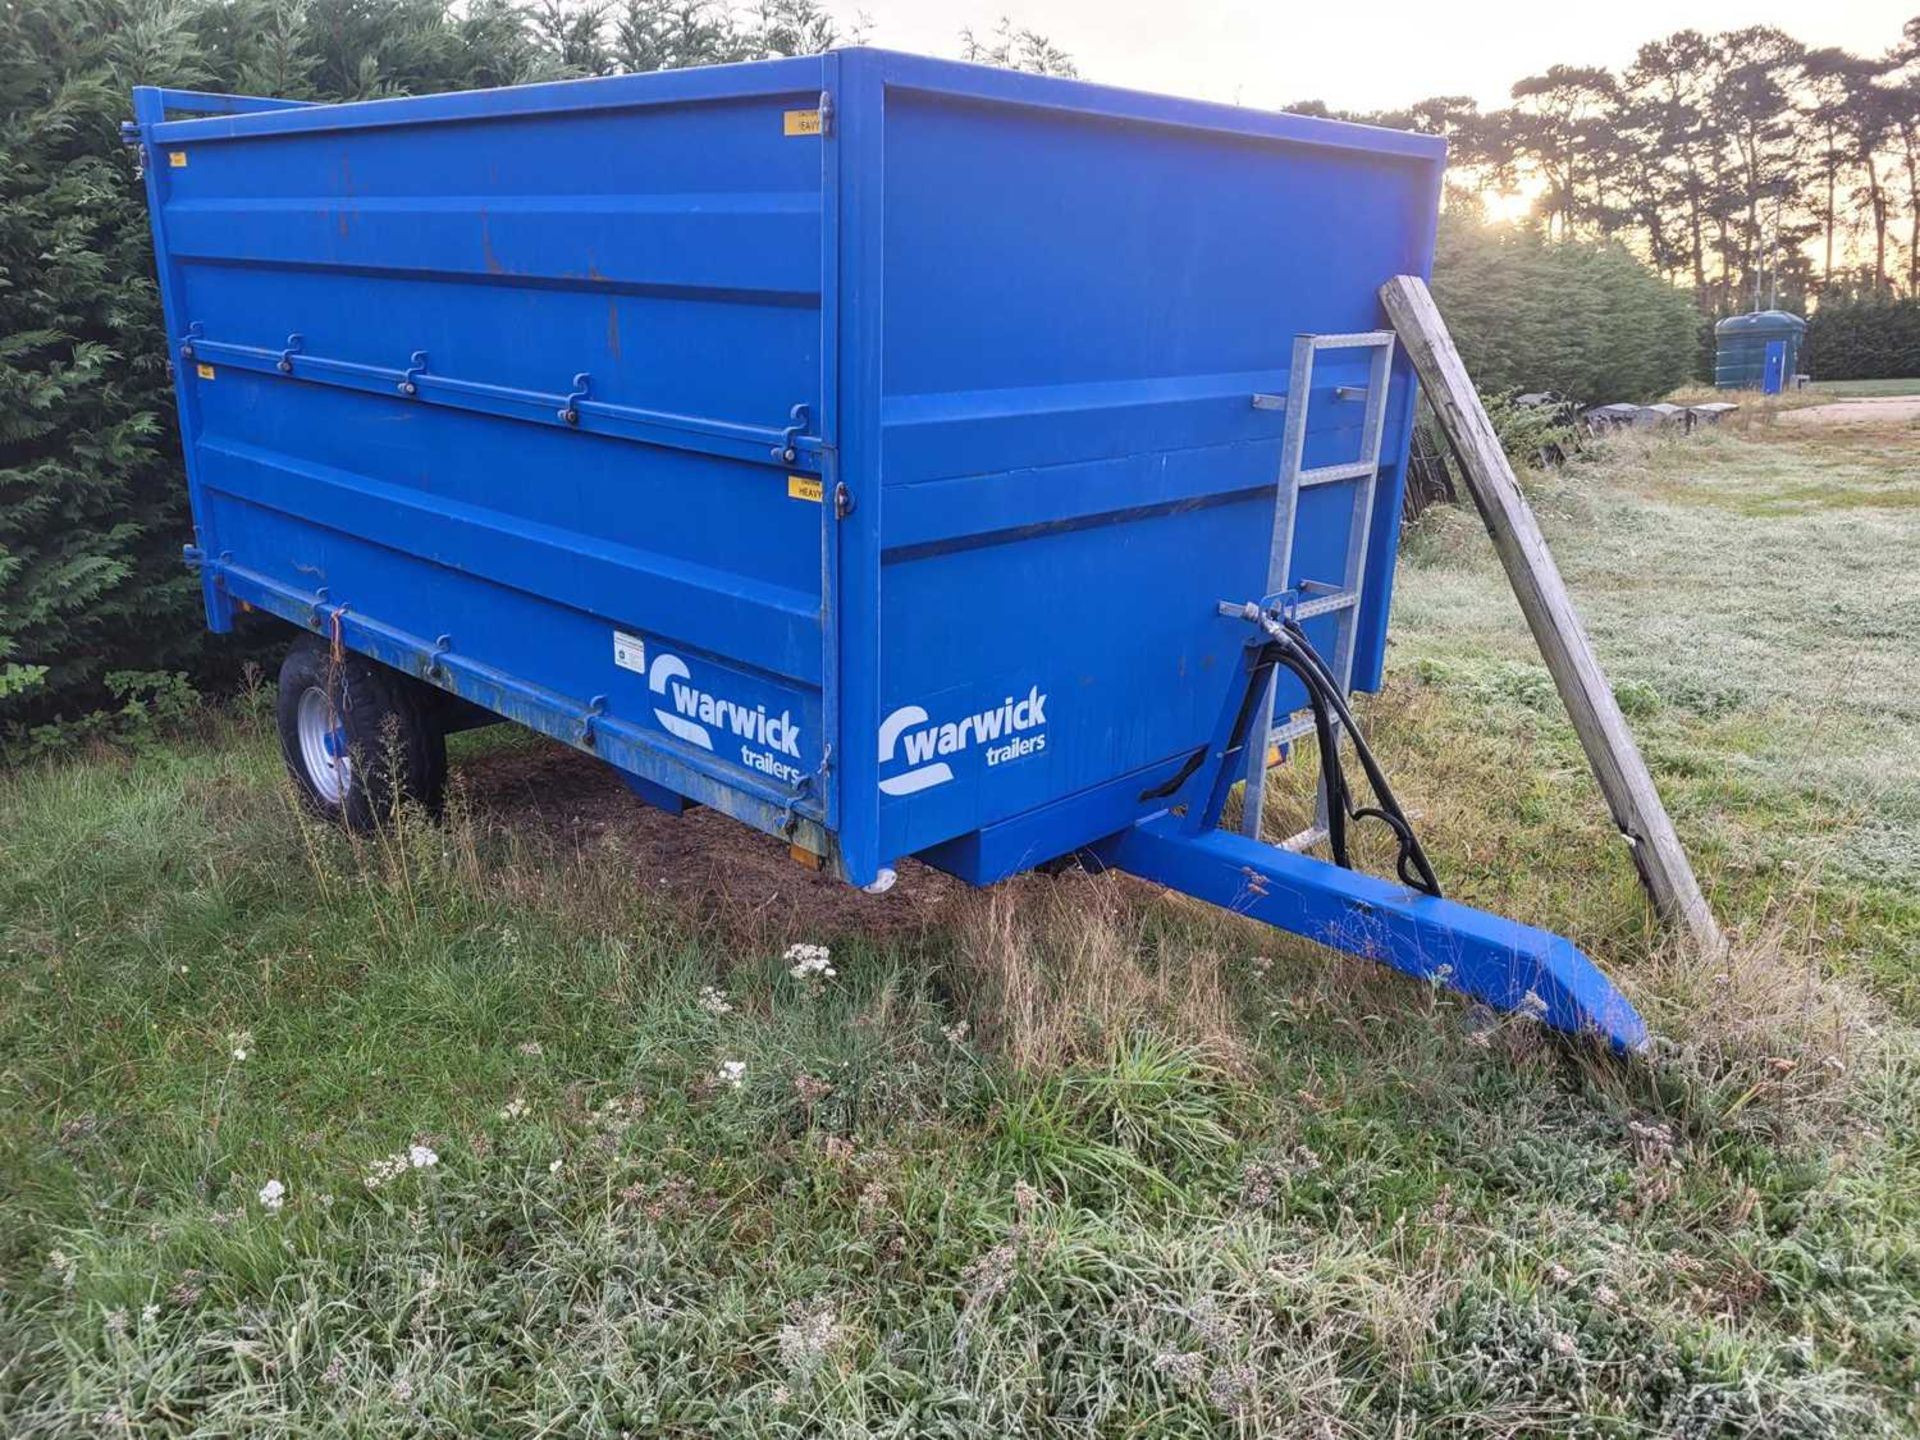 6t Warwick tipping trailer, manufactured in 2017, single drop side with twin barn style rear - Image 5 of 8